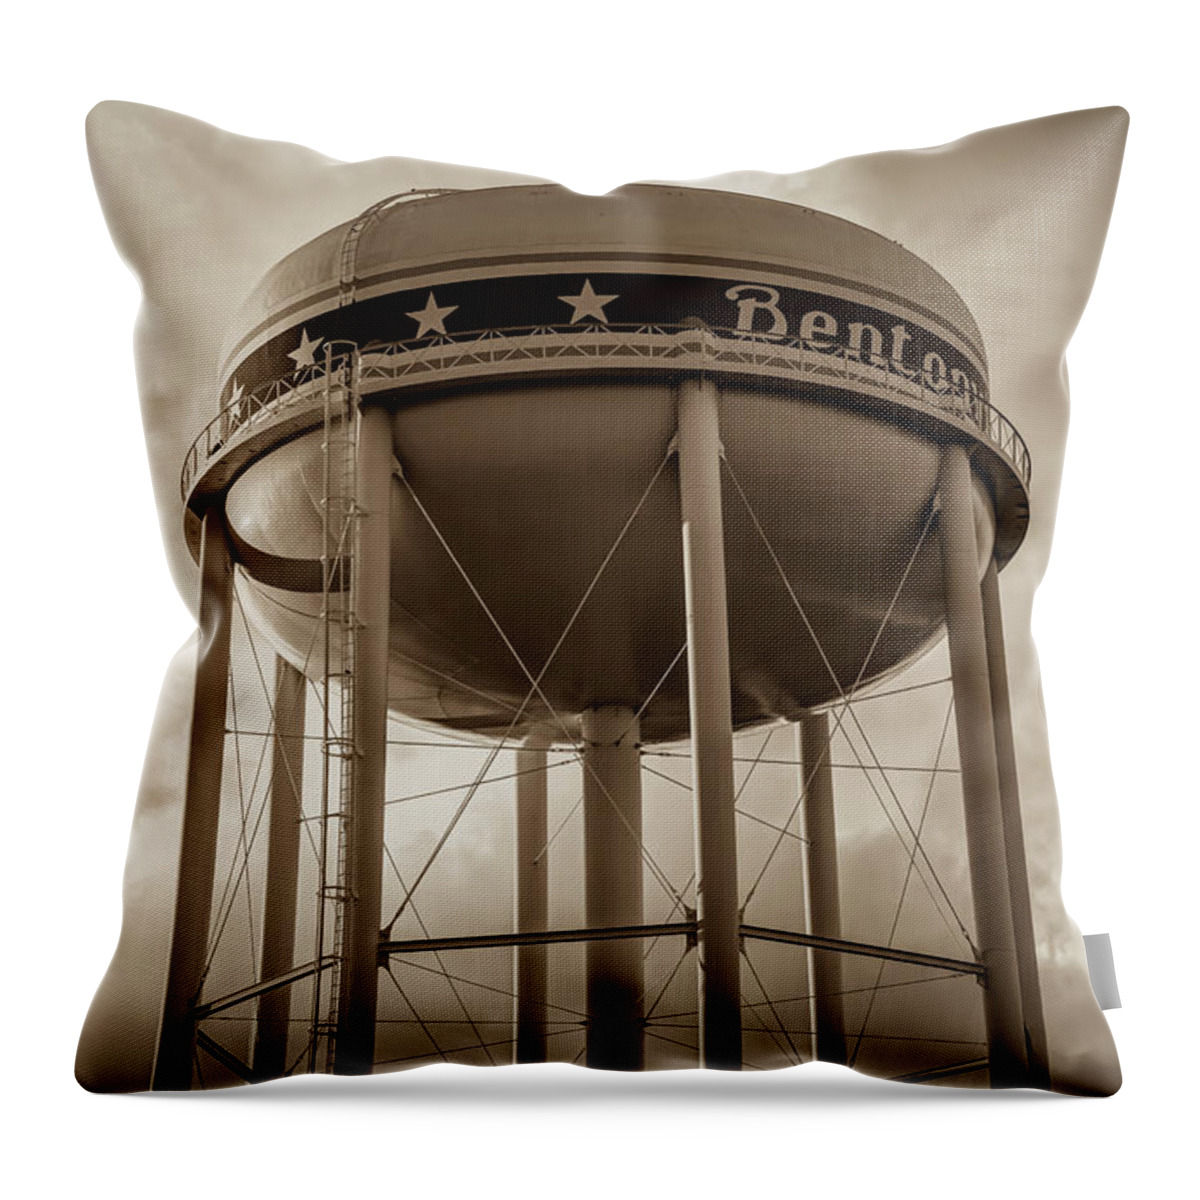 Bentonville Water Tower Throw Pillow featuring the photograph City of Bentonville Arkansas Water Tower - Sepia by Gregory Ballos